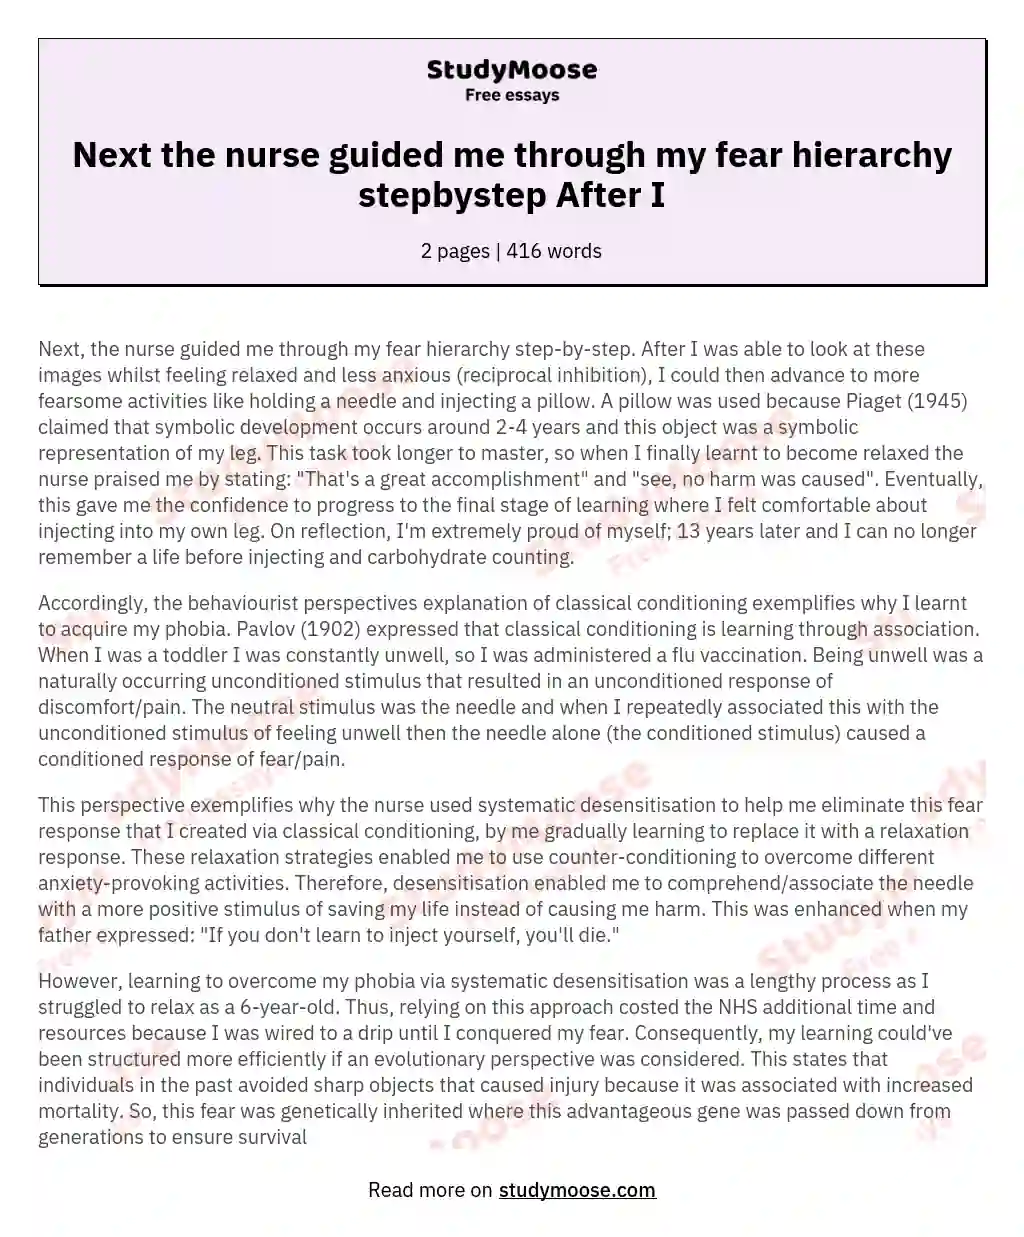 Next the nurse guided me through my fear hierarchy stepbystep After I essay